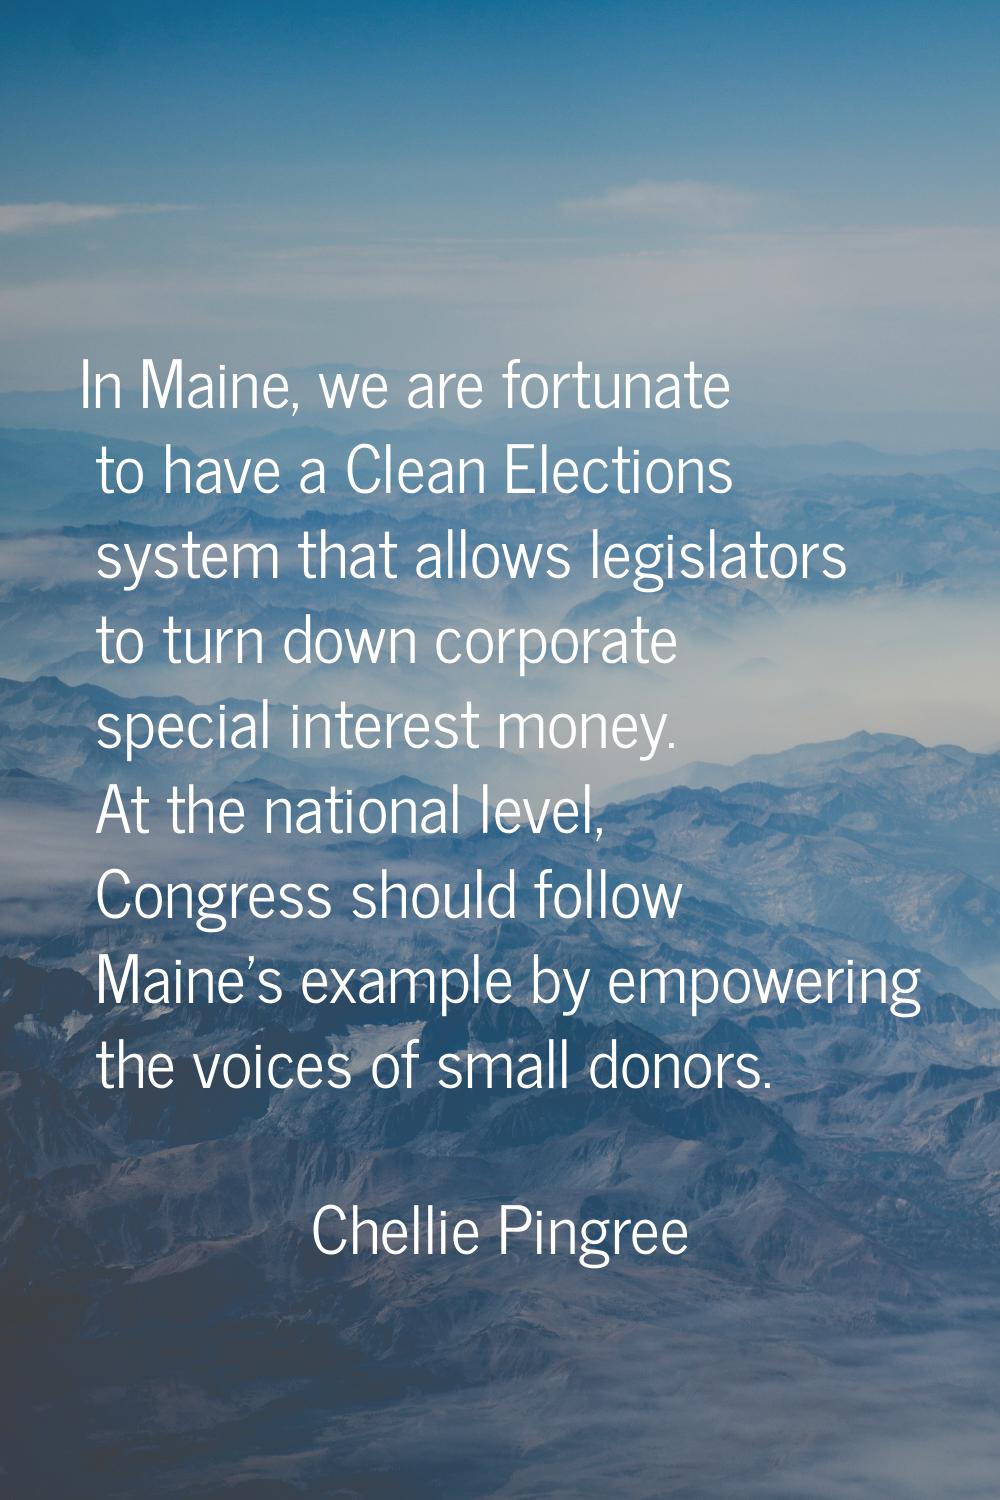 In Maine, we are fortunate to have a Clean Elections system that allows legislators to turn down co